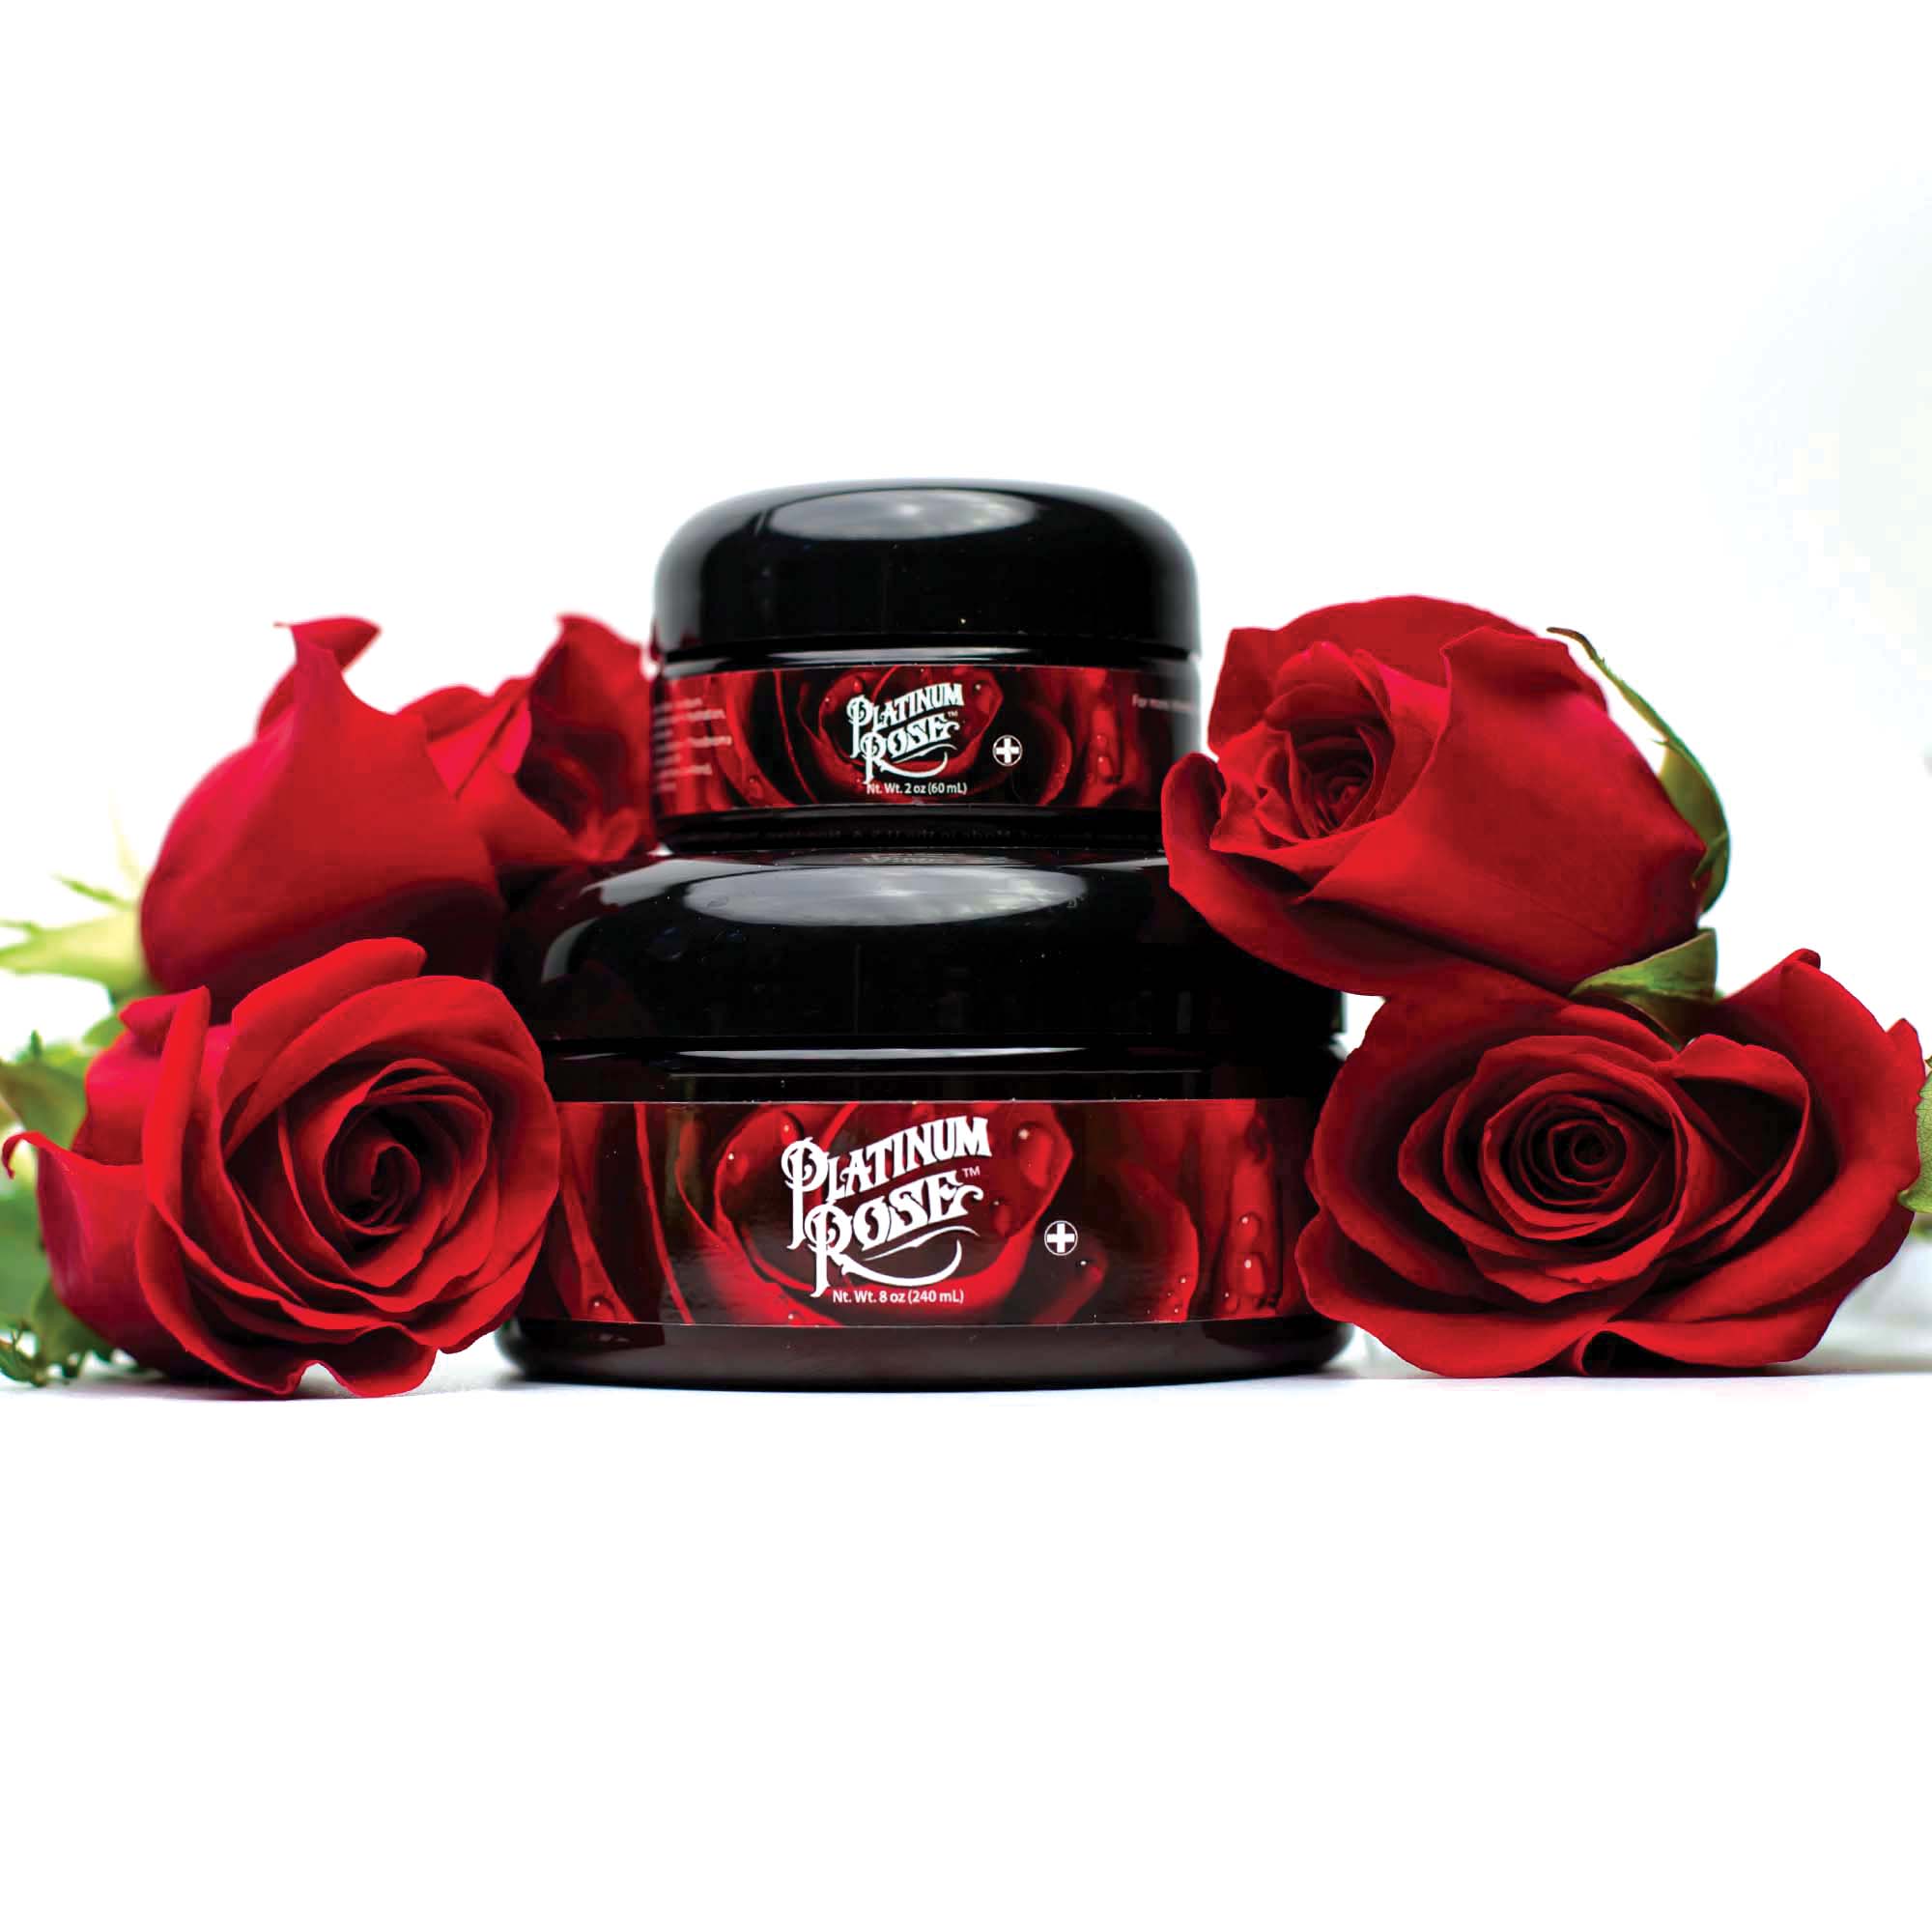 An 8oz Jar of rose scented Platinum Rose Tattoo Aftercare surrounded by freshly cut red roses